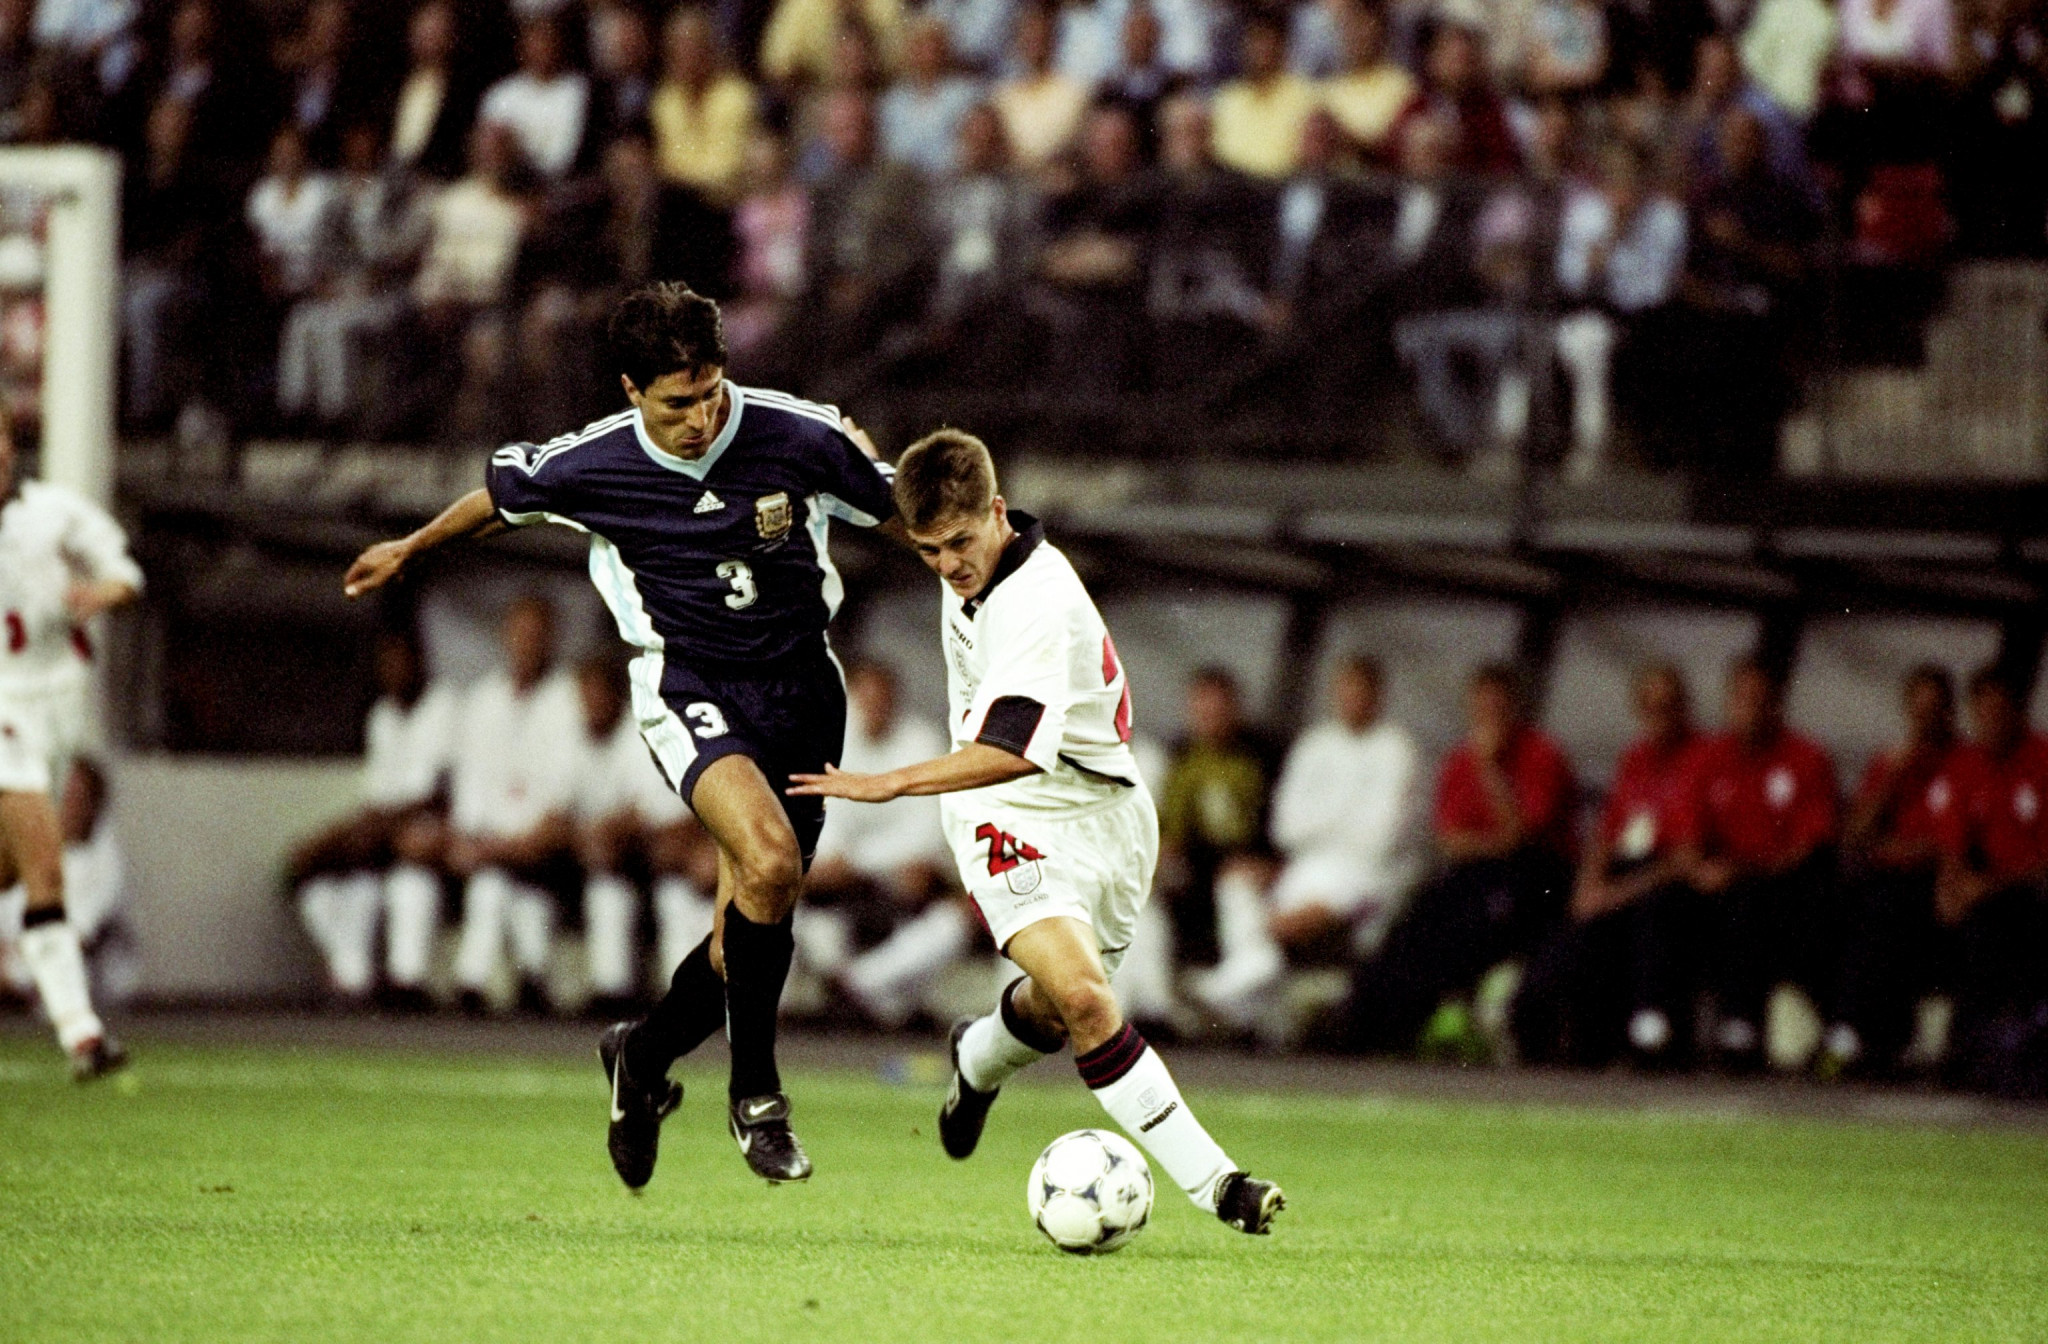 An 18-year-old Michael Owen makes his way past Argentinian defender Jose Chamot en route to scoring the spectacular goal at the 1998 World Cup finals that remains one of the highlights of English footballing history ©Getty Images